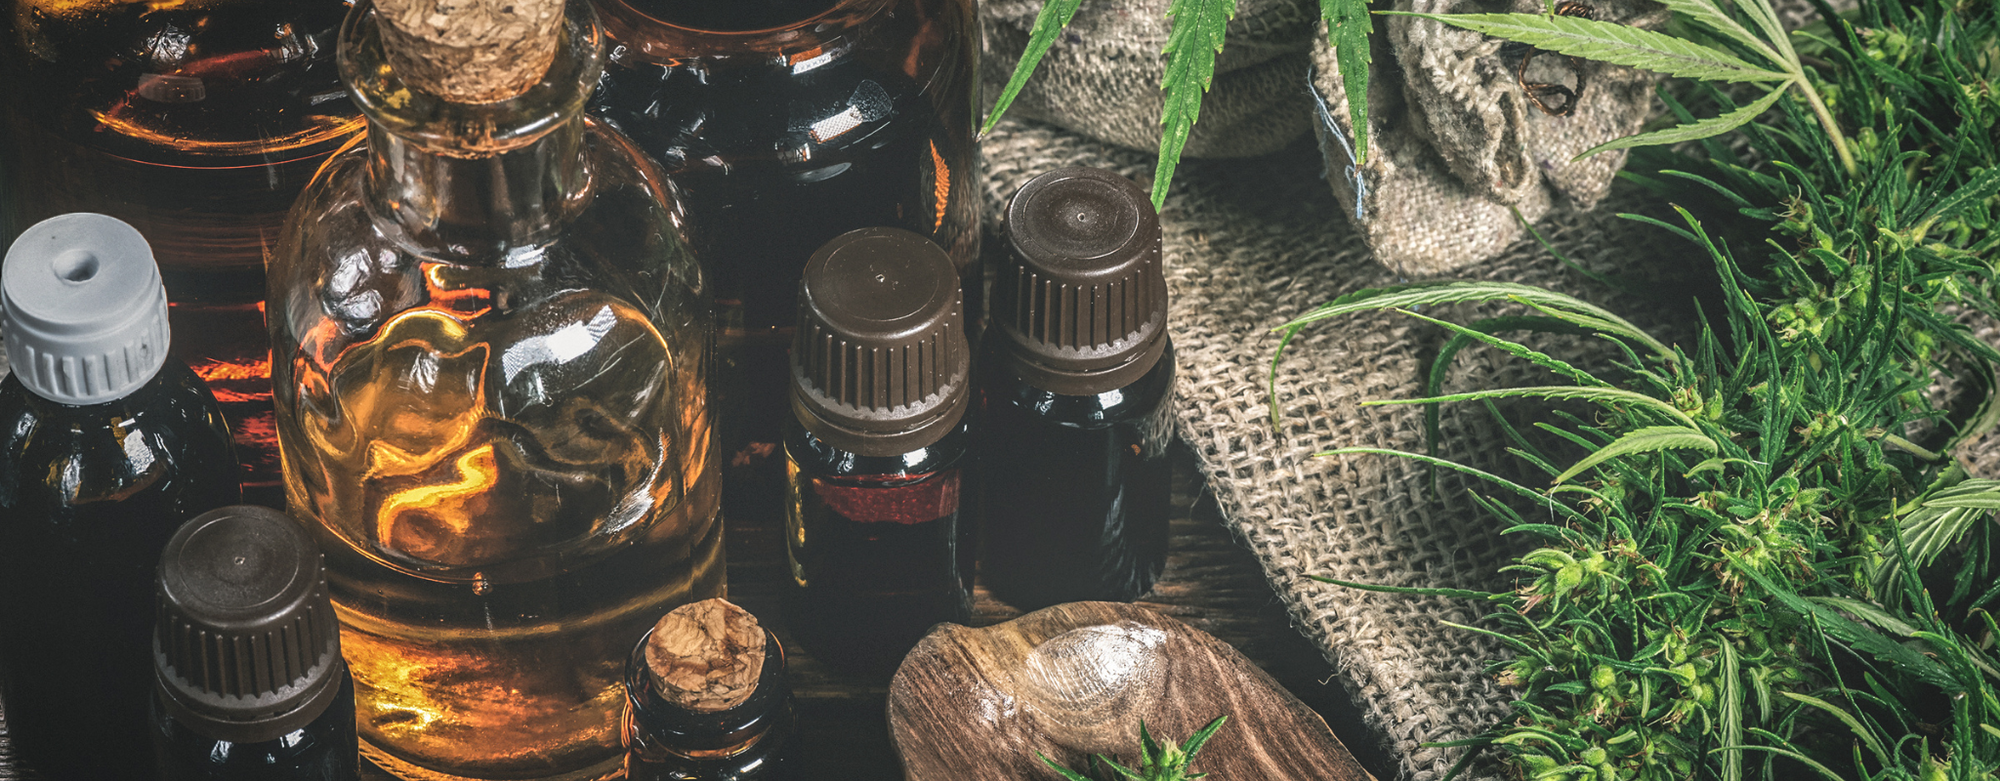 A unique view of the CBD oil ingredients, herbs, and flavors. 